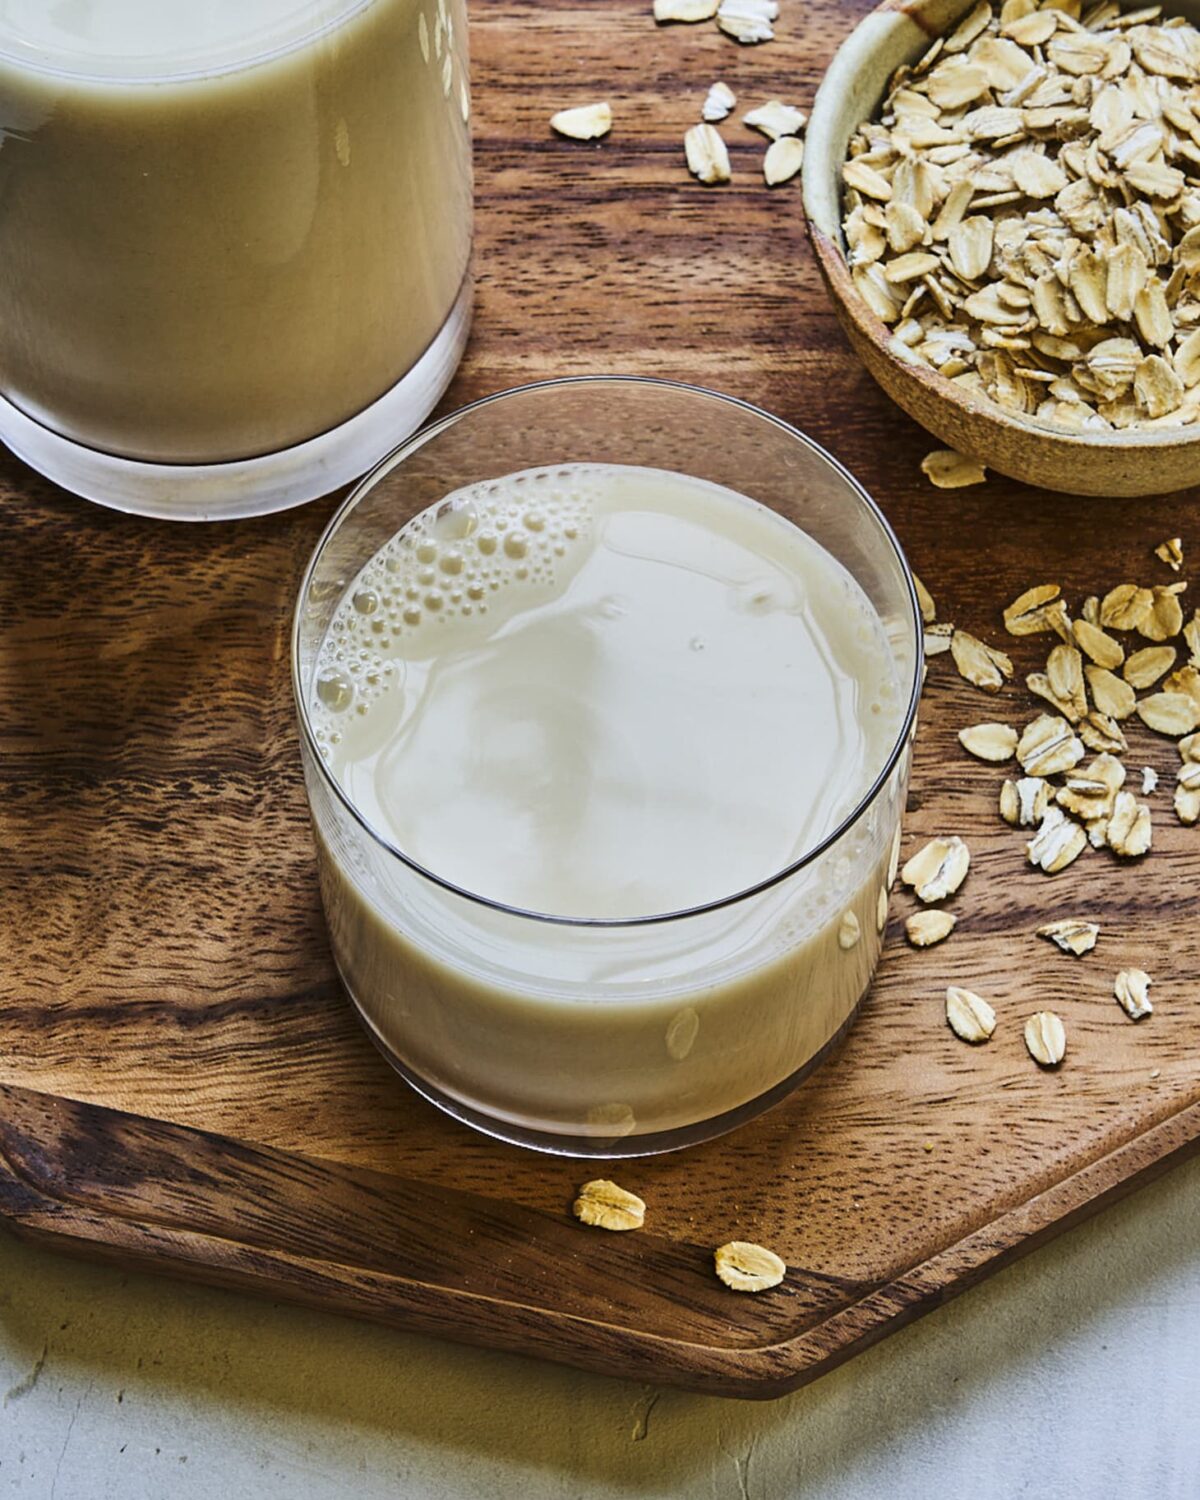 For the best at-home lattes, try this delightfully fresh, homemade oat milk. (Laura Rege/TNS)